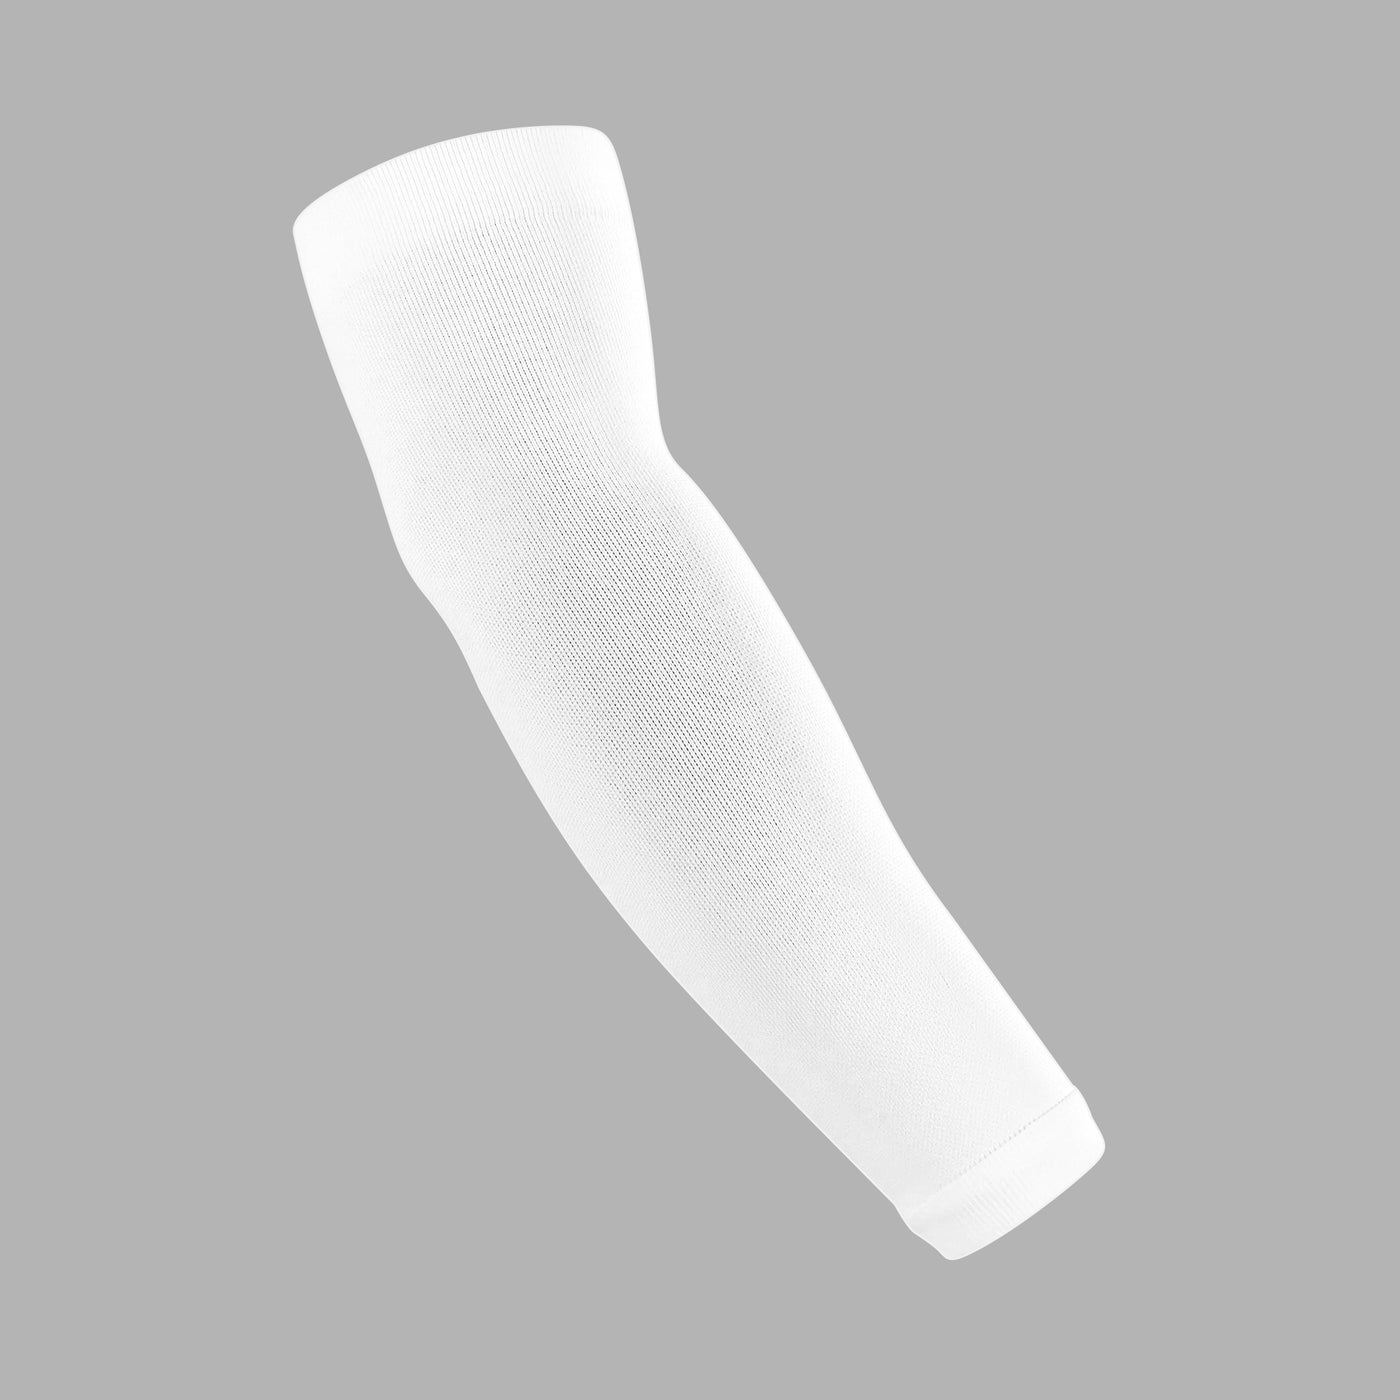 Basic White One Size Fits All Football Arm Sleeve